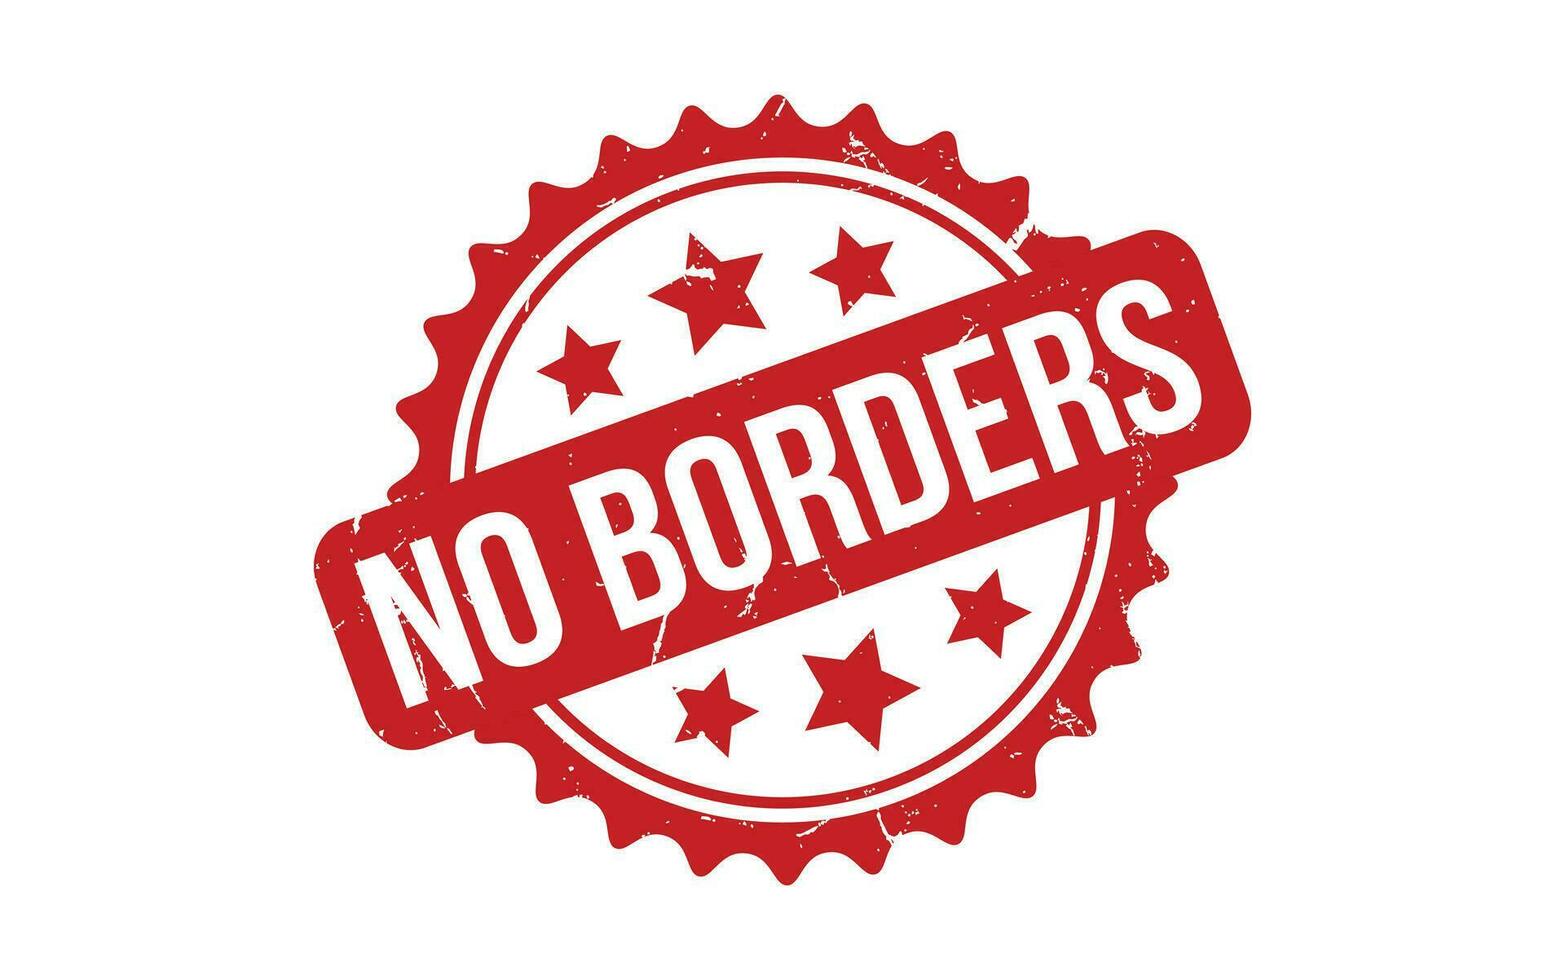 No Borders rubber grunge stamp seal vector